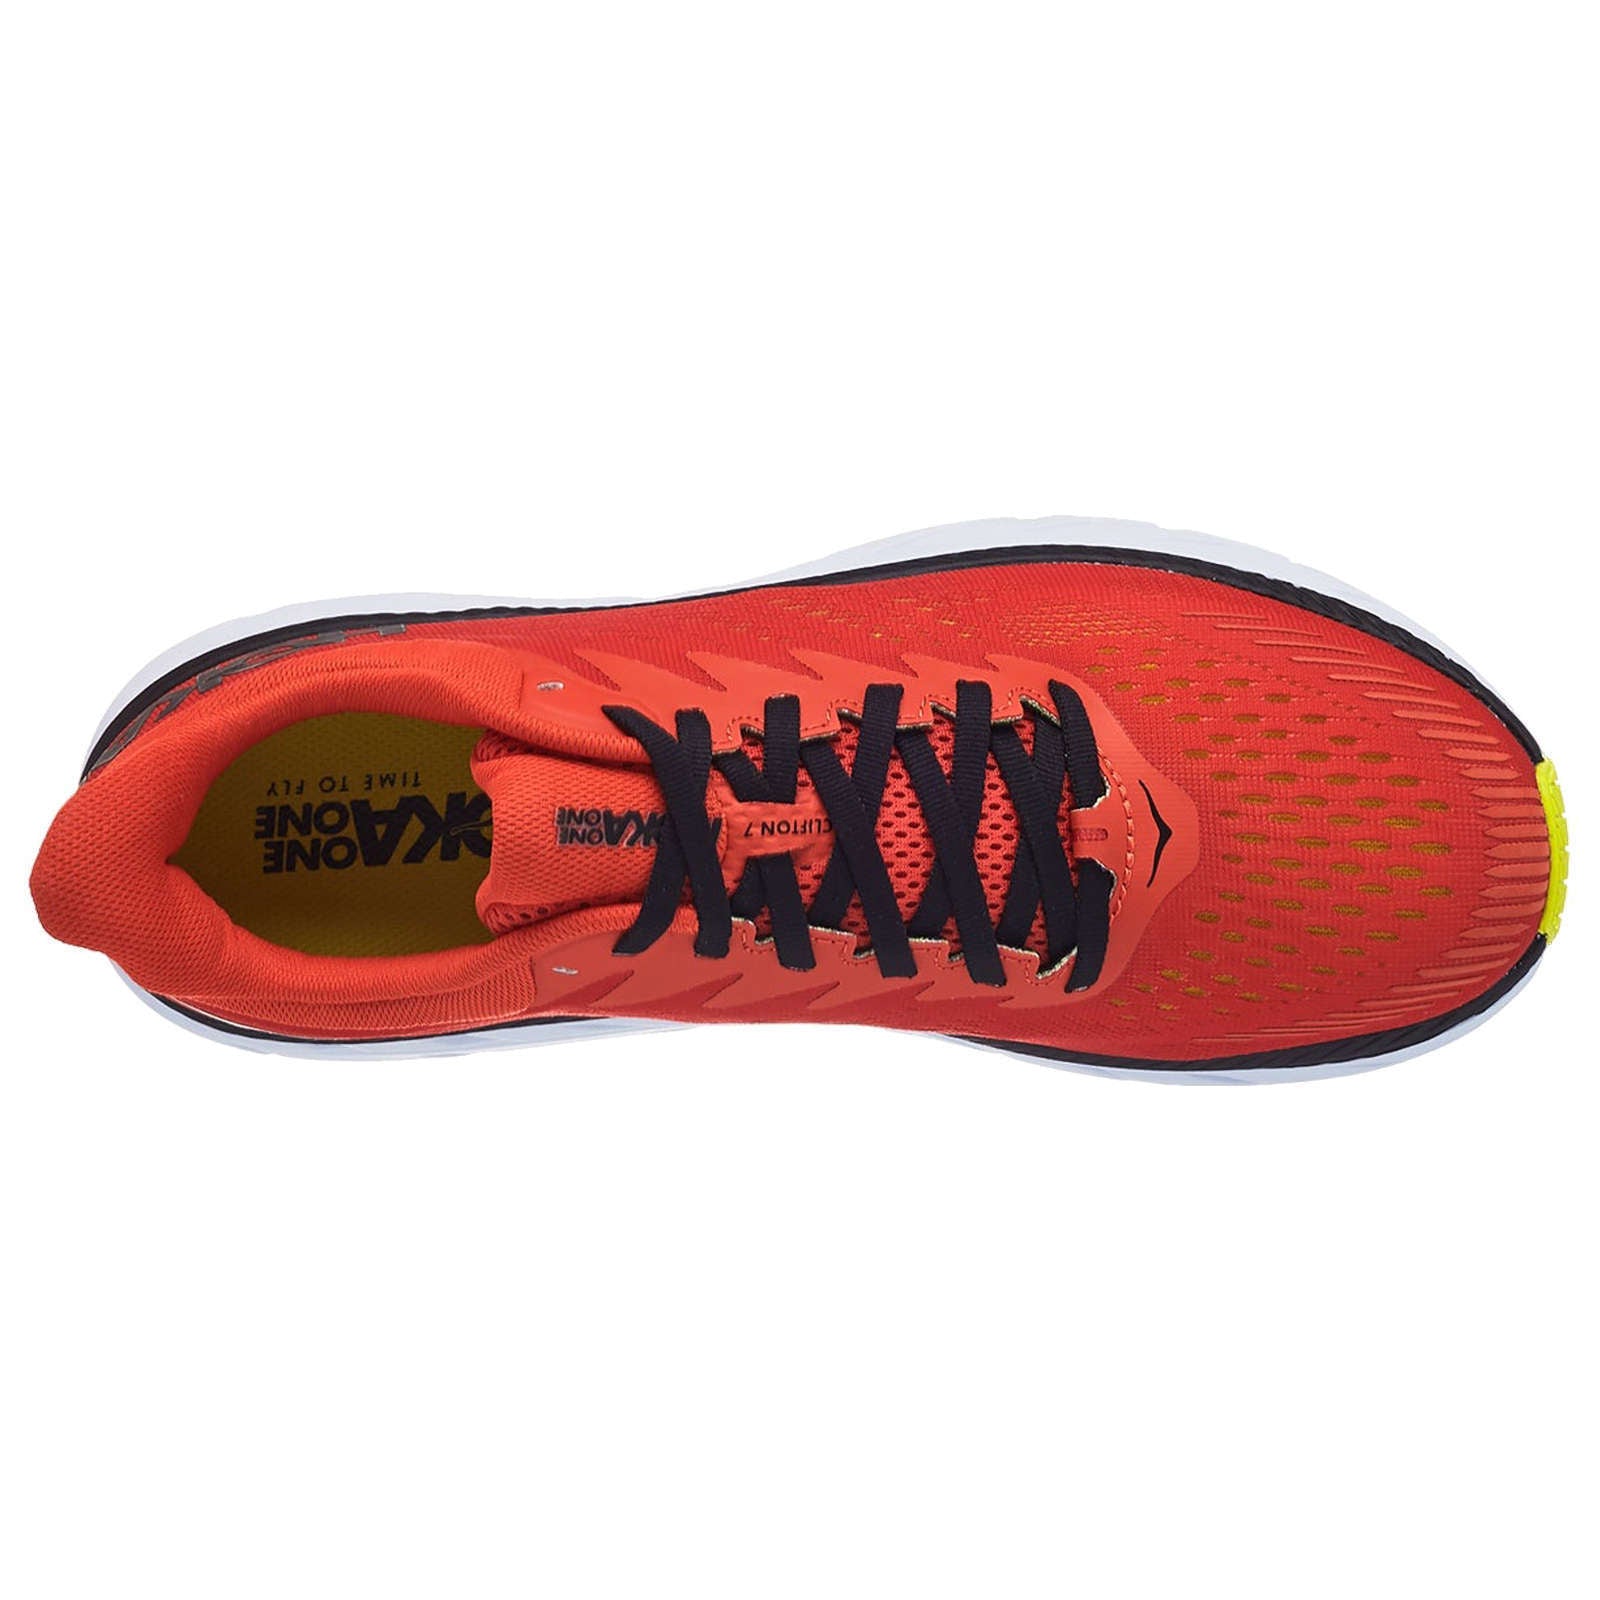 Hoka One One Clifton 7 Mesh Men's Low-Top Road Running Trainers#color_chili black